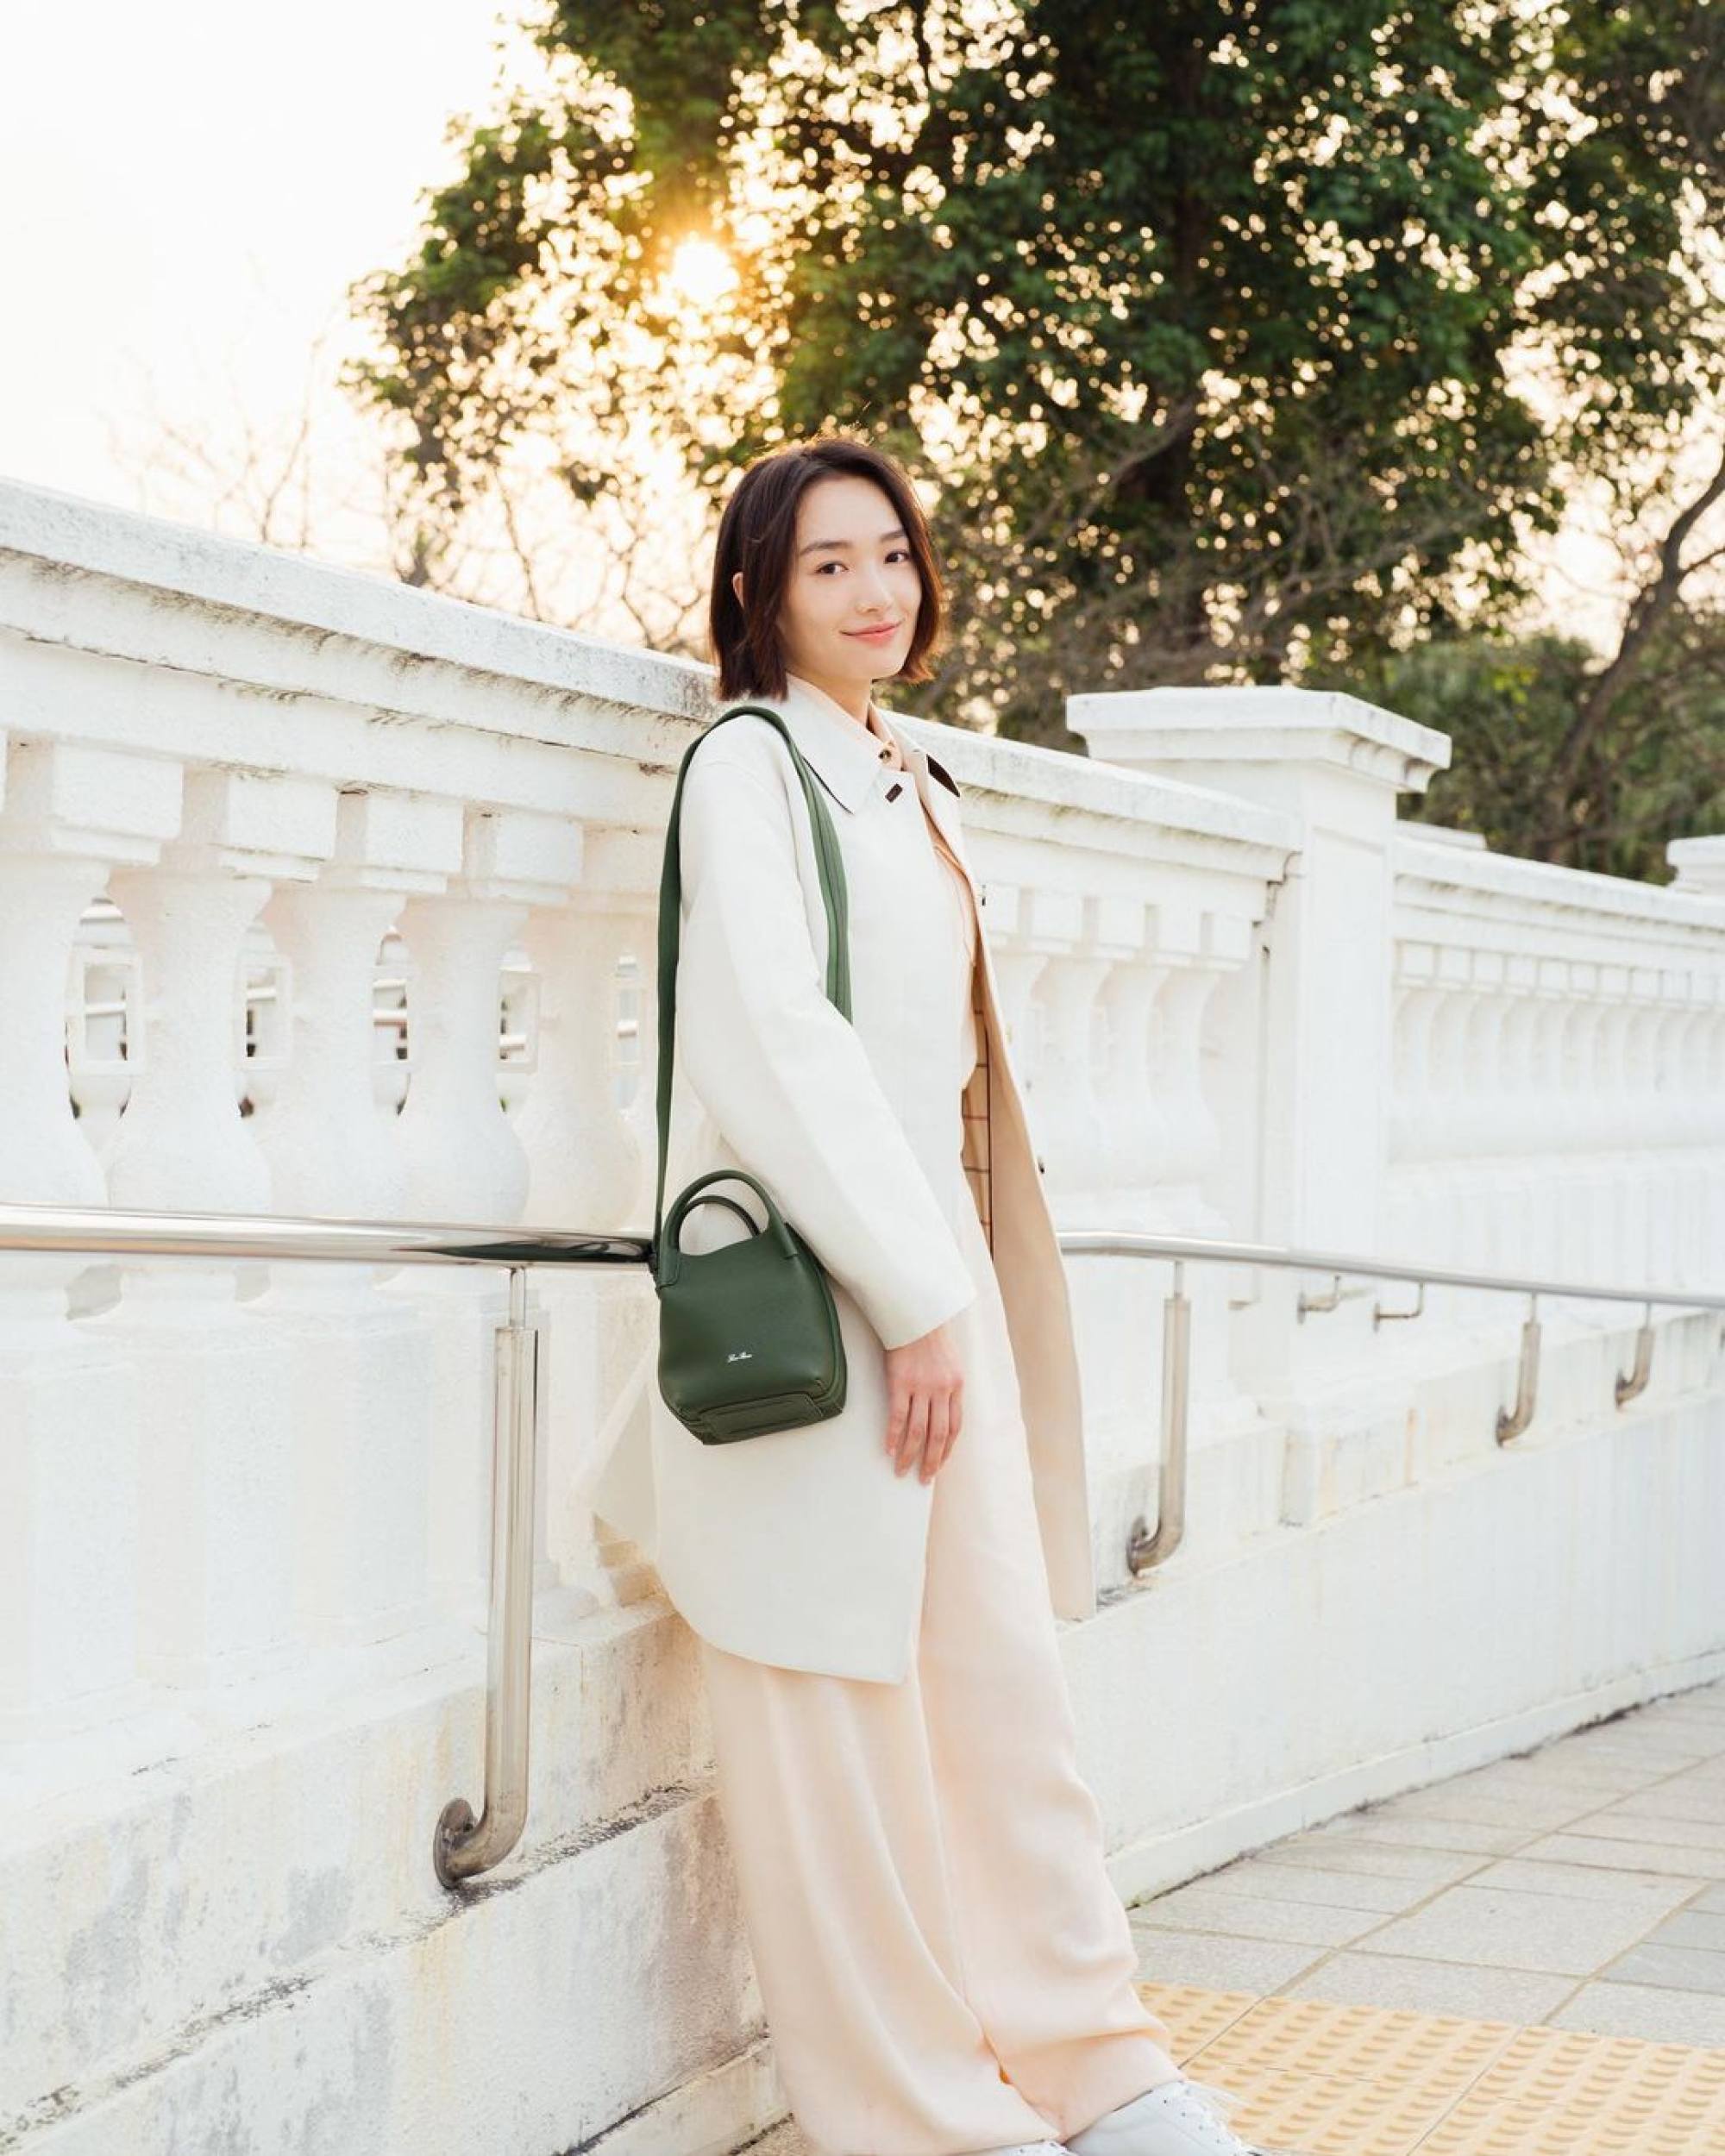 Hong Kong actress Cecilia Choi’s exquisite luxury bag collection: from ...